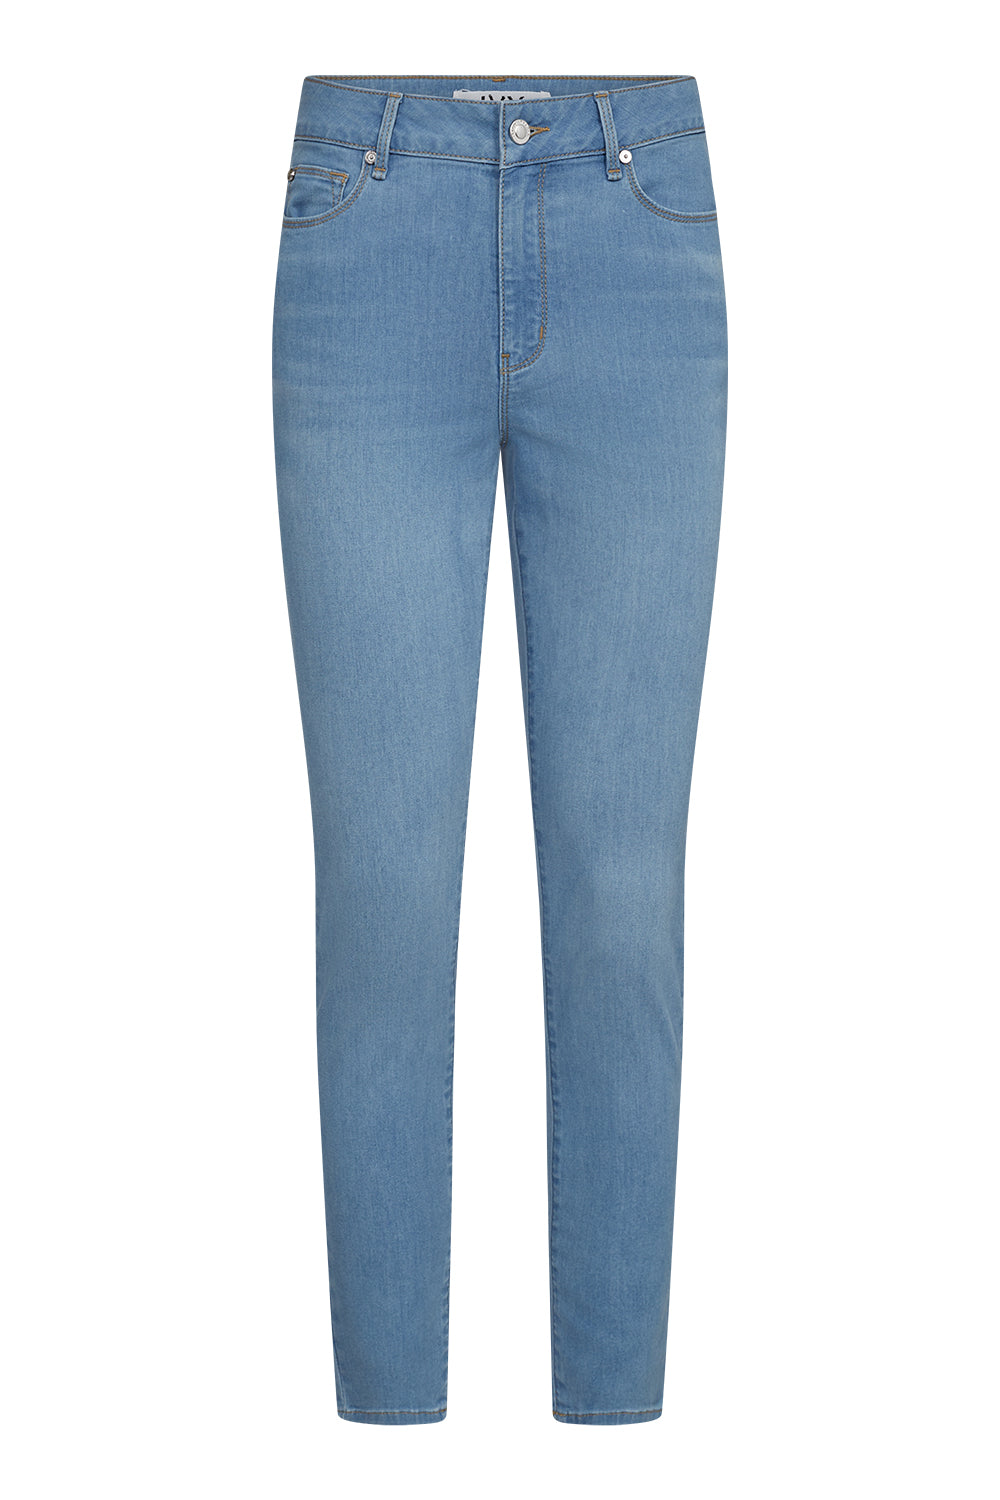 Alexa Jeans Excl. Greece Bright Blue